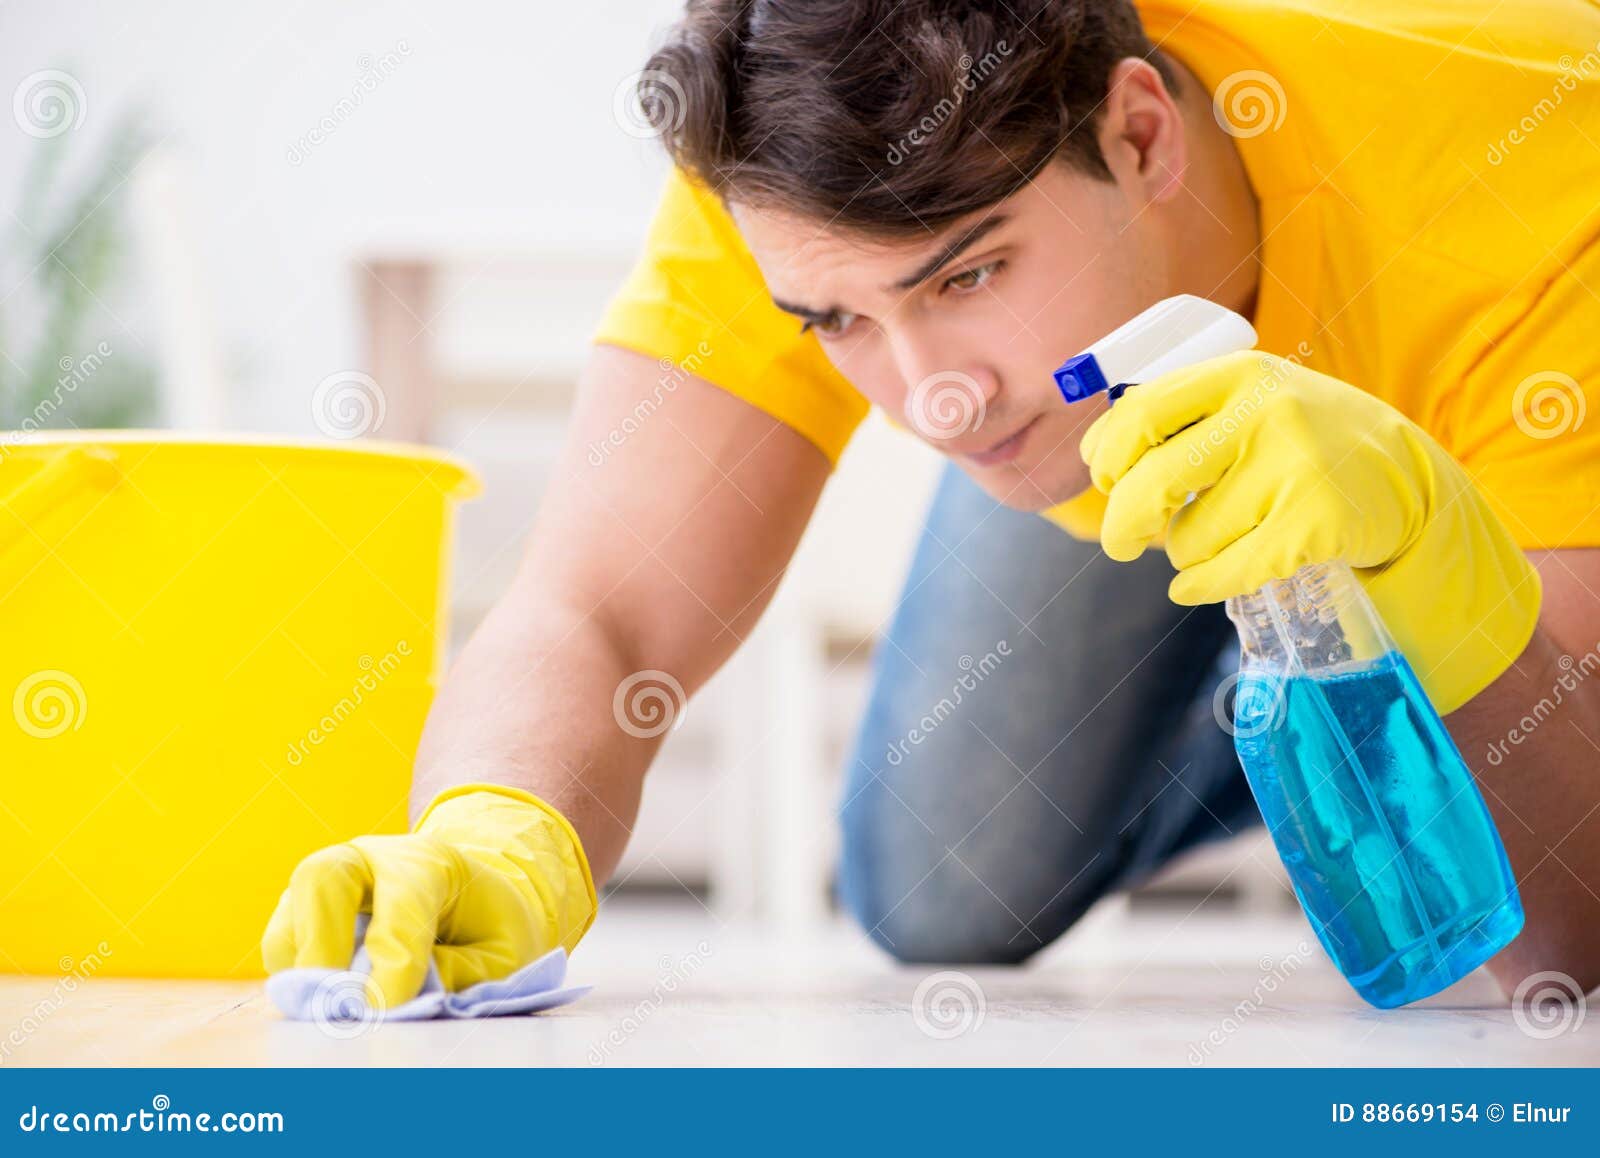 The Man Husband Cleaning The House Helping His Wife Stock Phot